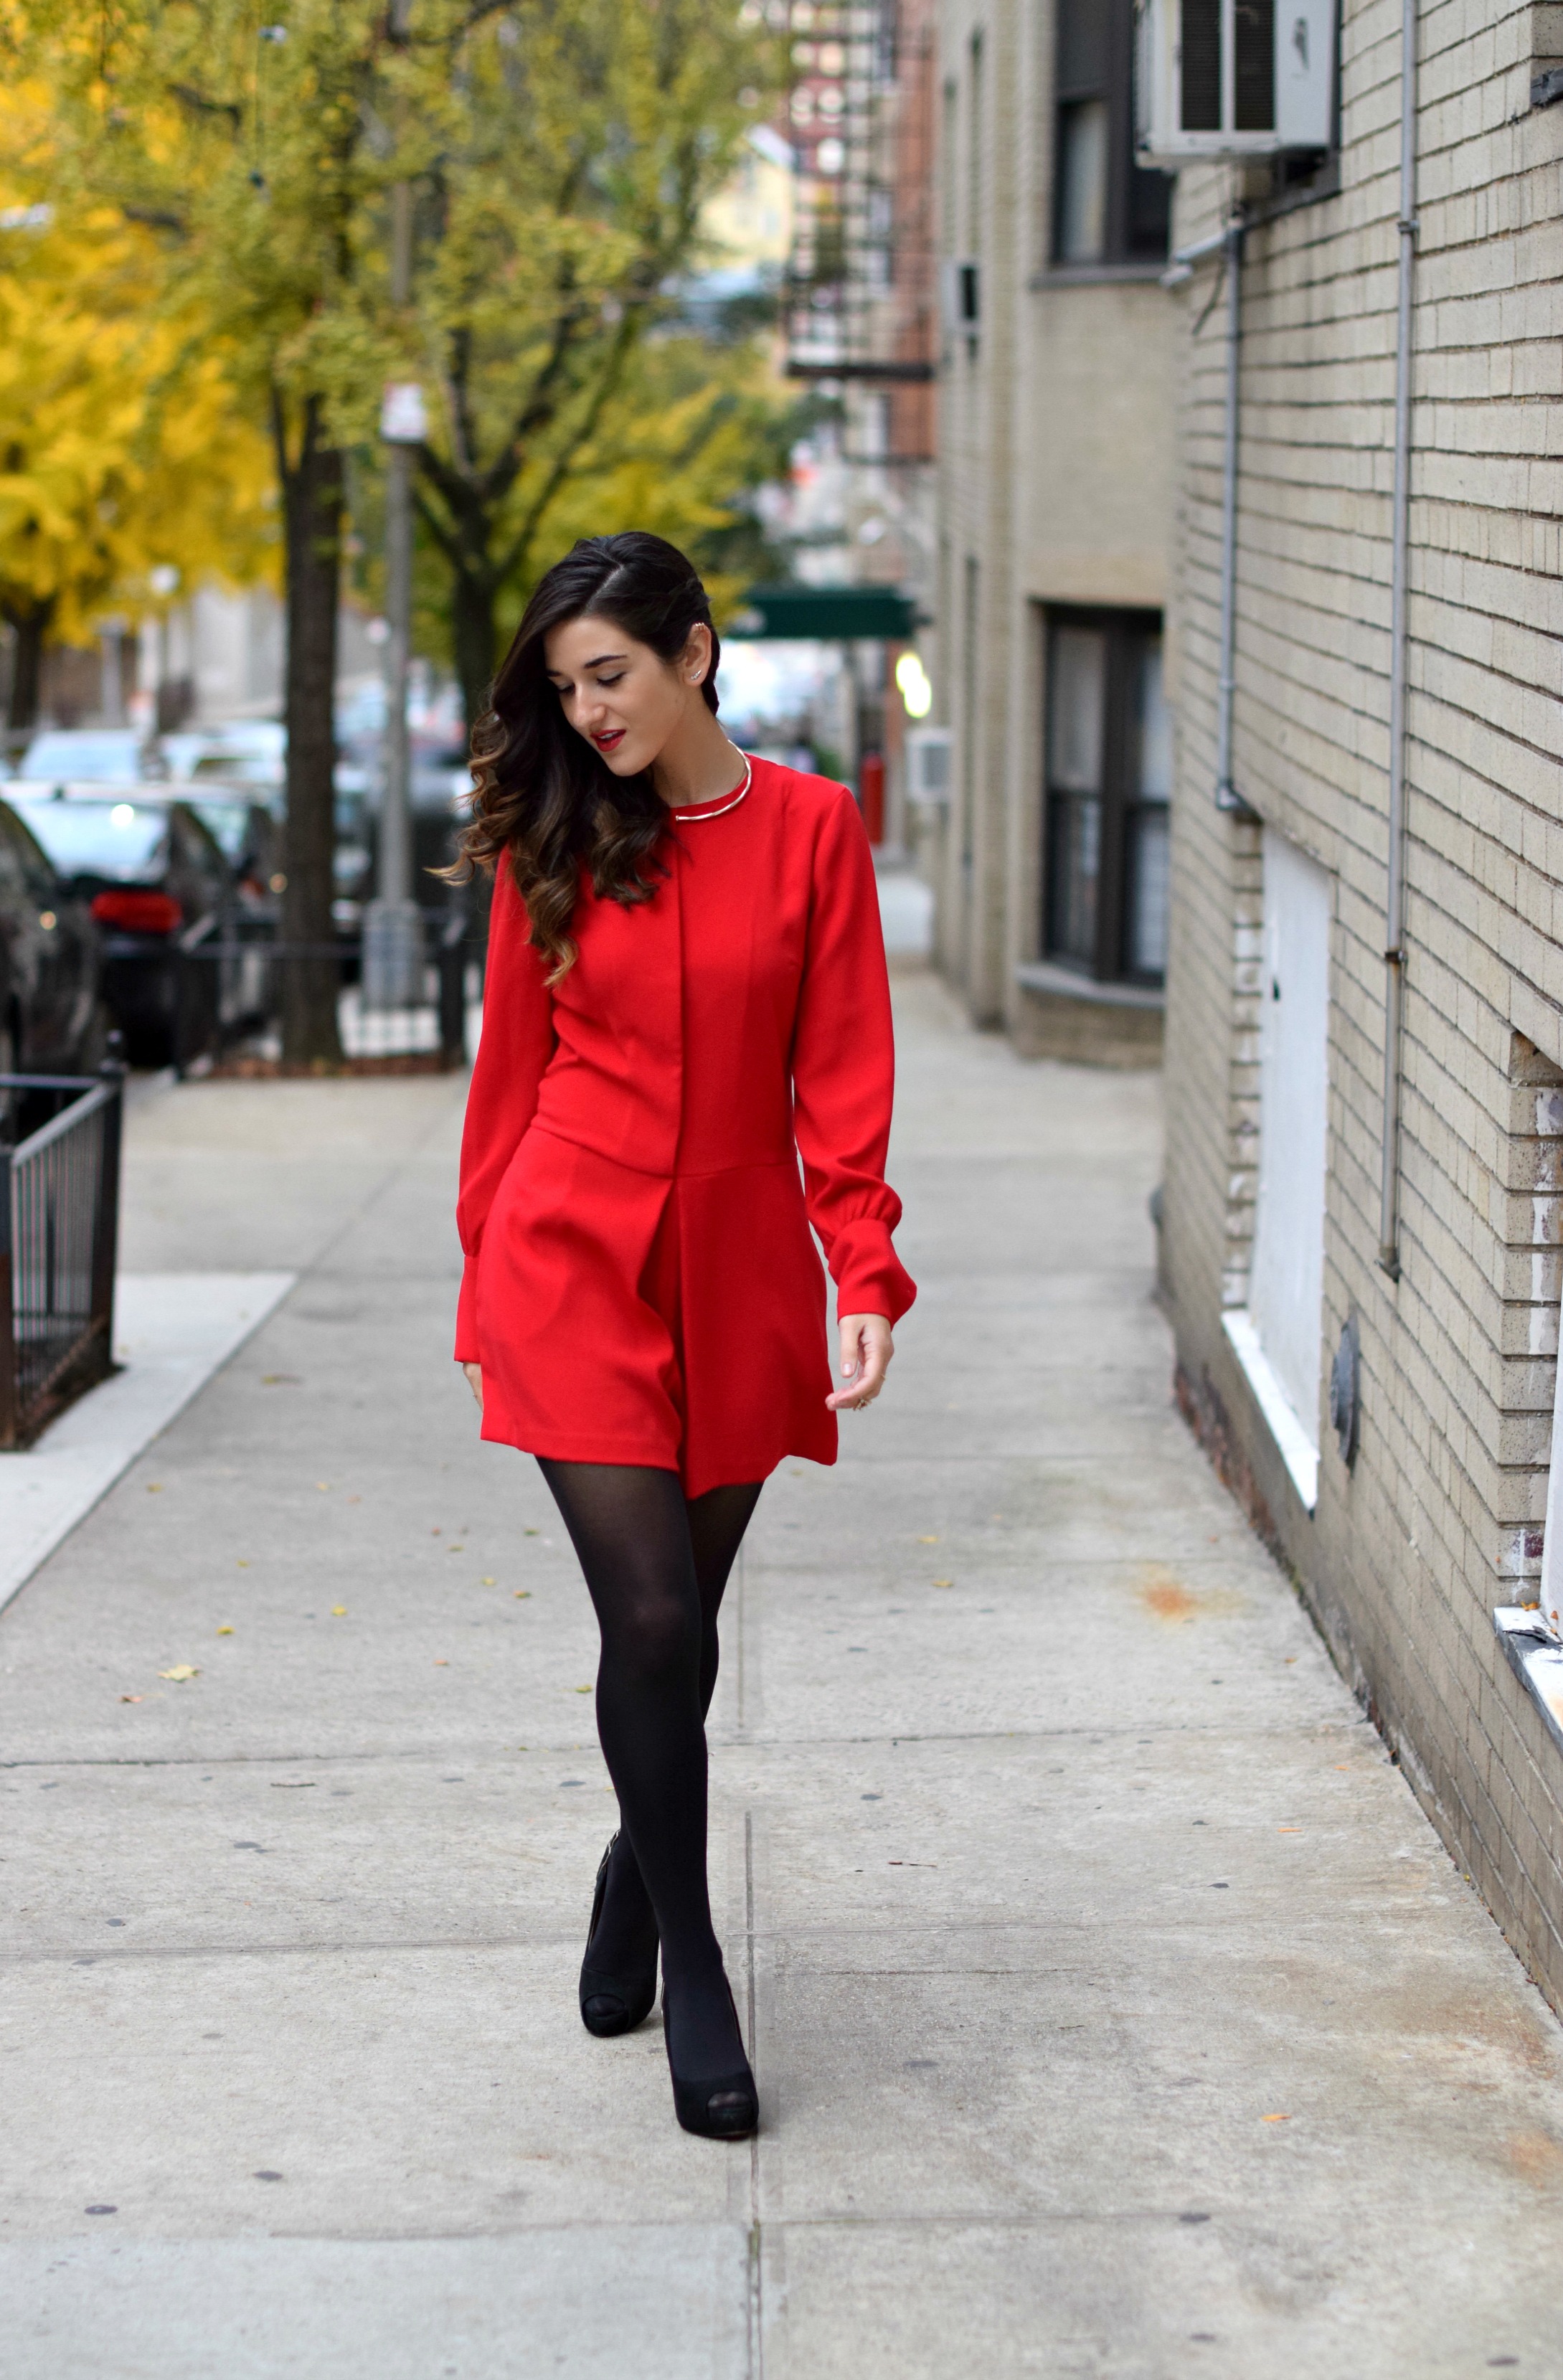 Red Romper Black Tights Louboutins & Love Fashion Blog Esther Santer NYC Street Style Blogger Winter Fall Look Shoes Heels Zara Gold Collar Necklace Braid Hair Inspo Outfit OOTD Photoshoot NYC Girl Women Stiletto Wear Shop  Clothing Model Accessories.jpg